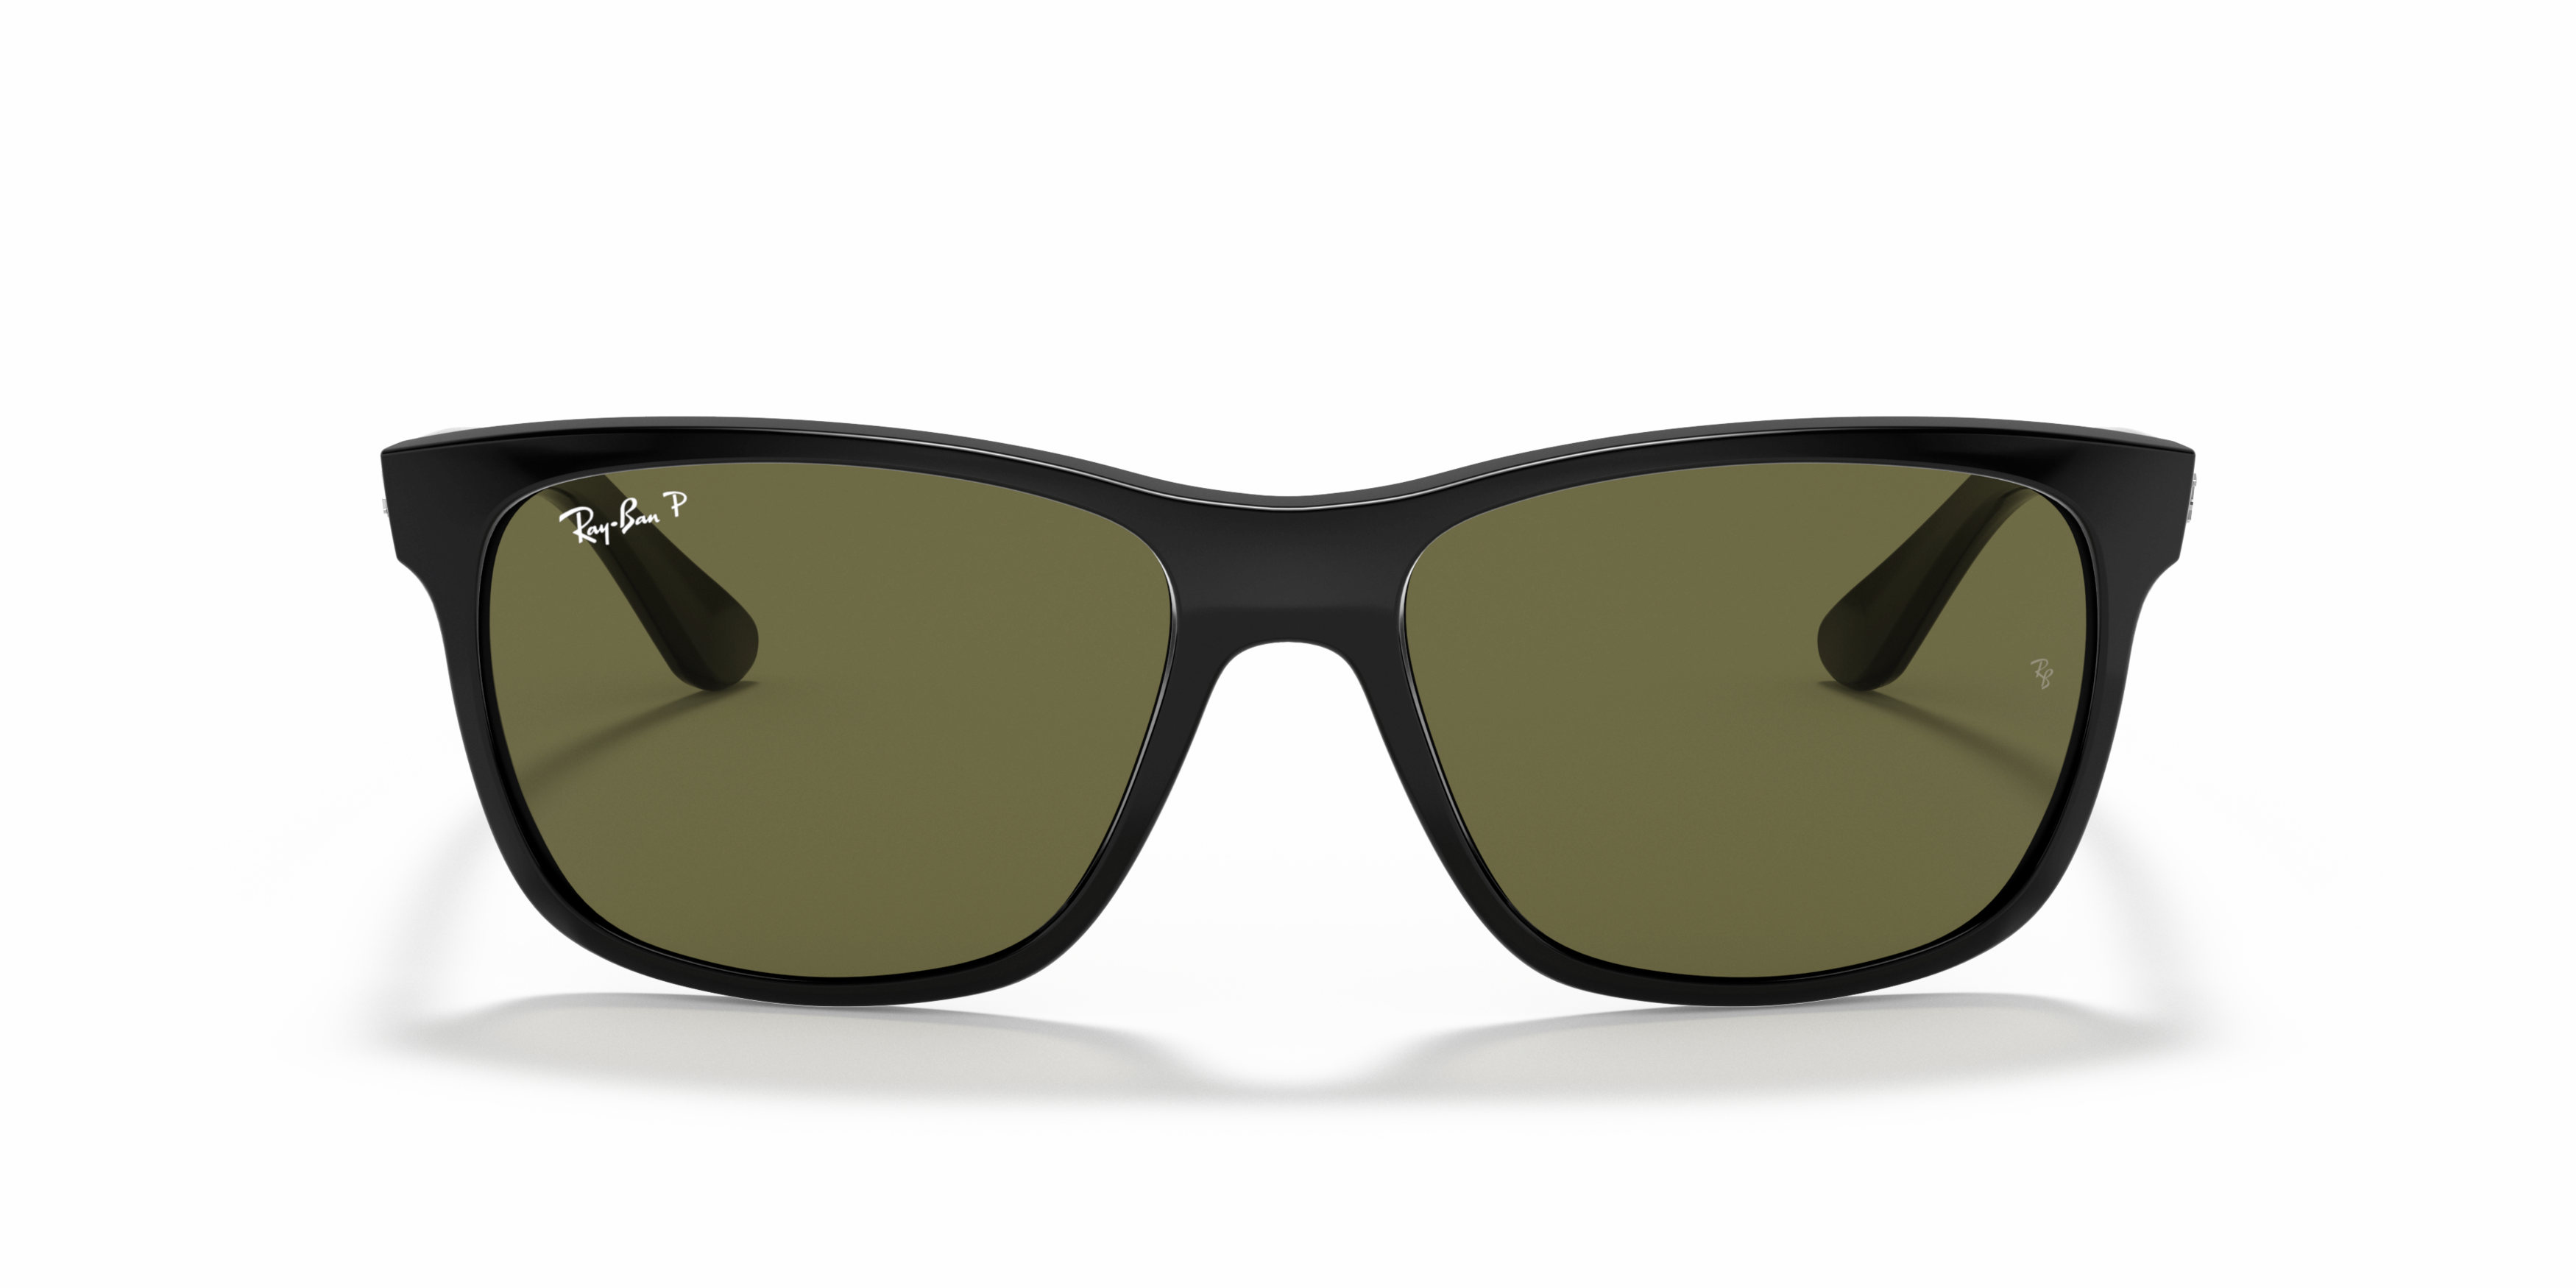 [products.image.front] Ray-Ban 0RB4181 601/9A